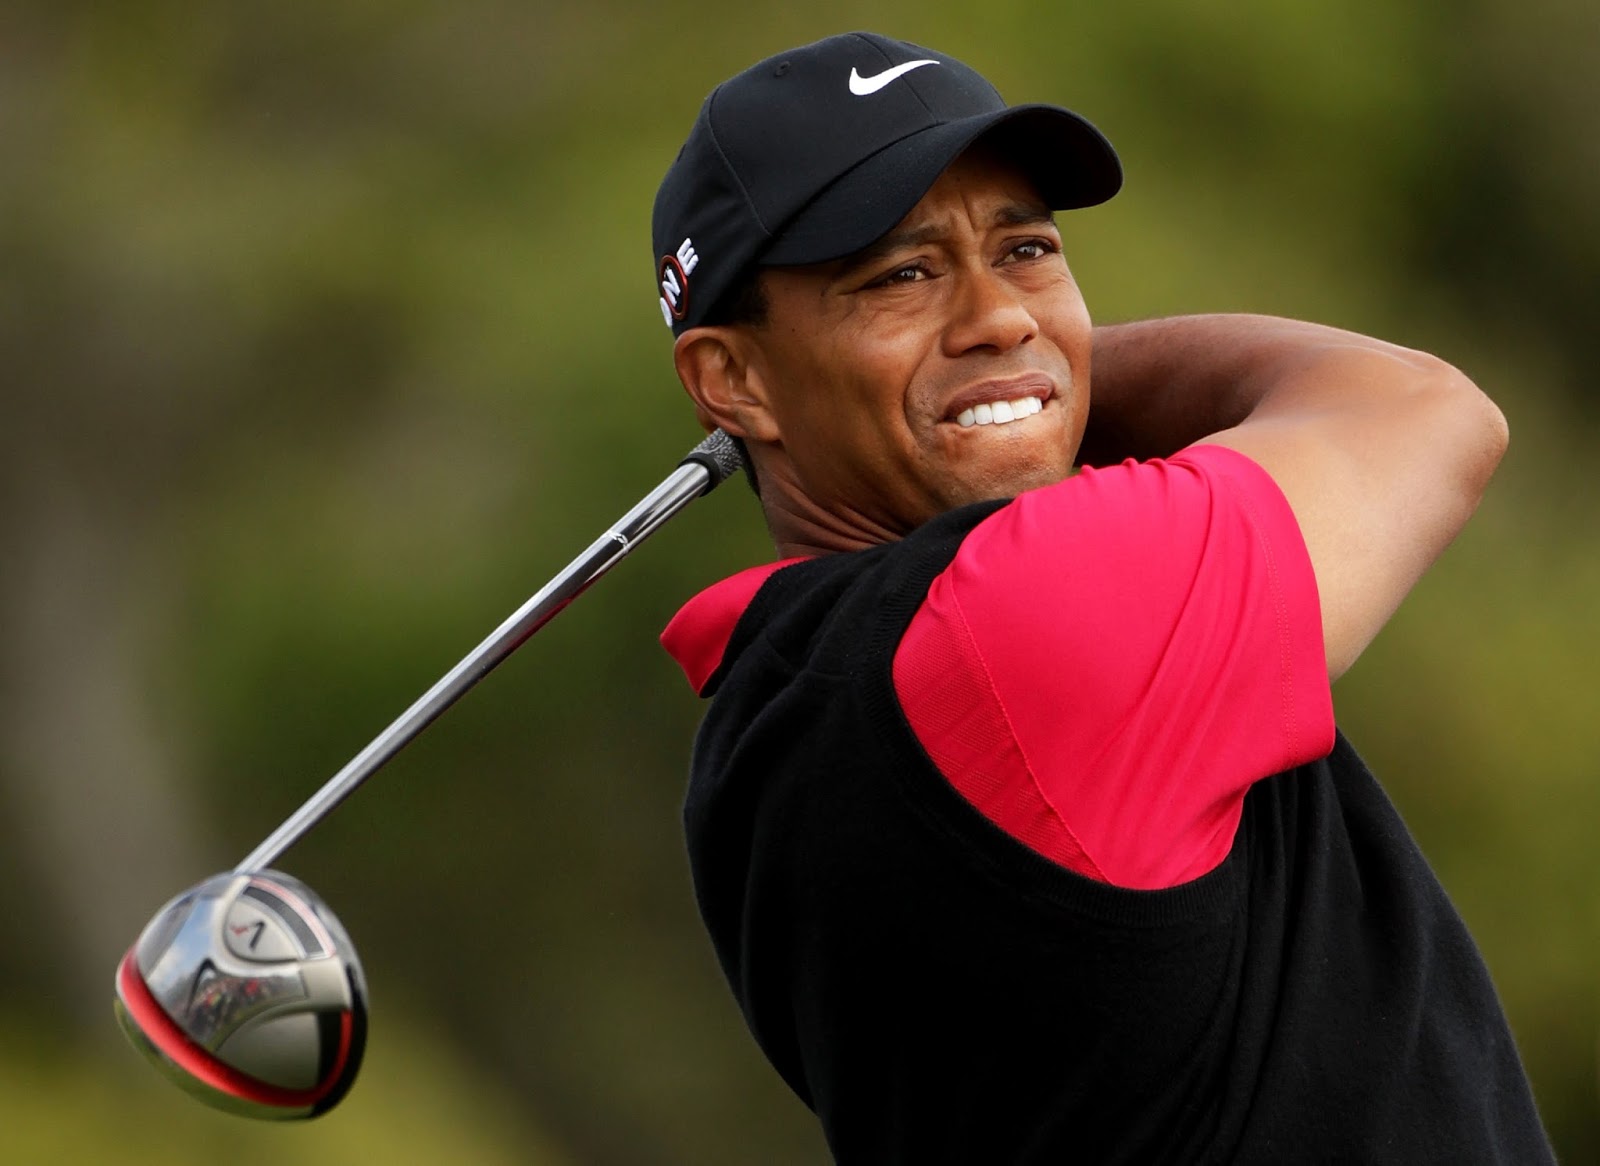 GOLF TIGER WOODS WON'T PLAY PGA CHAMPIONSHIP; WILL MISS ALL FOUR